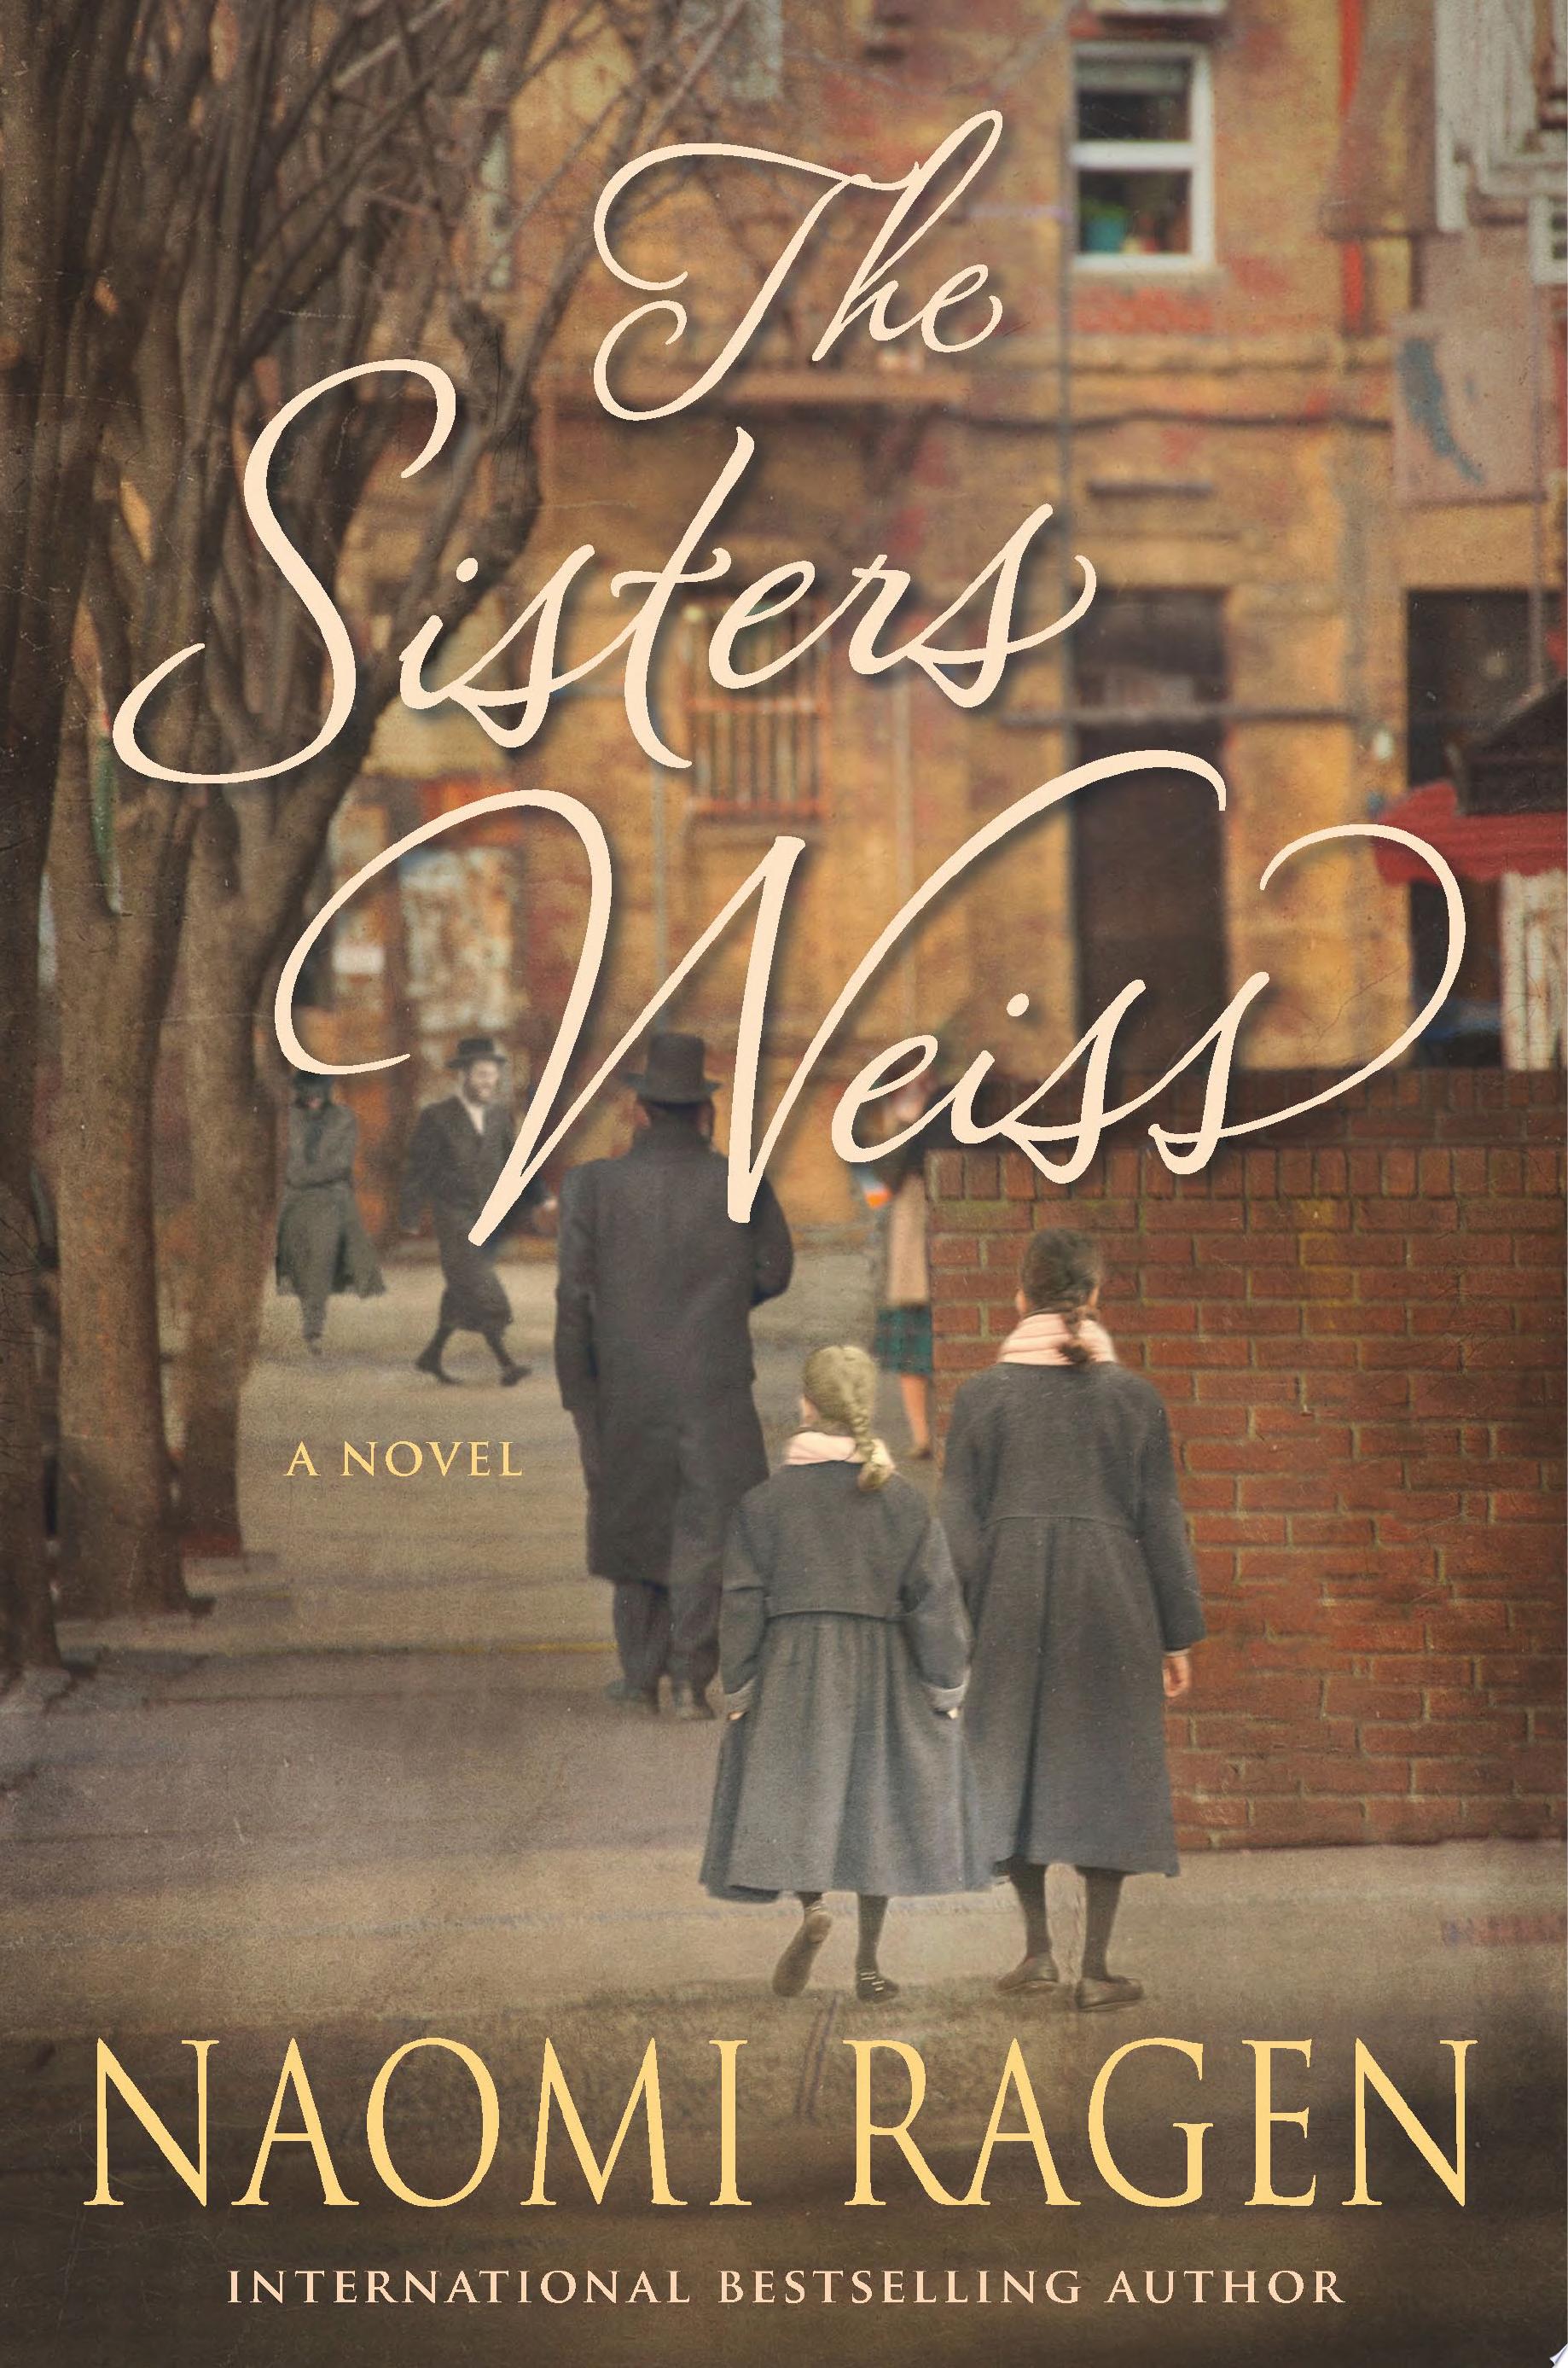 Image for "The Sisters Weiss"